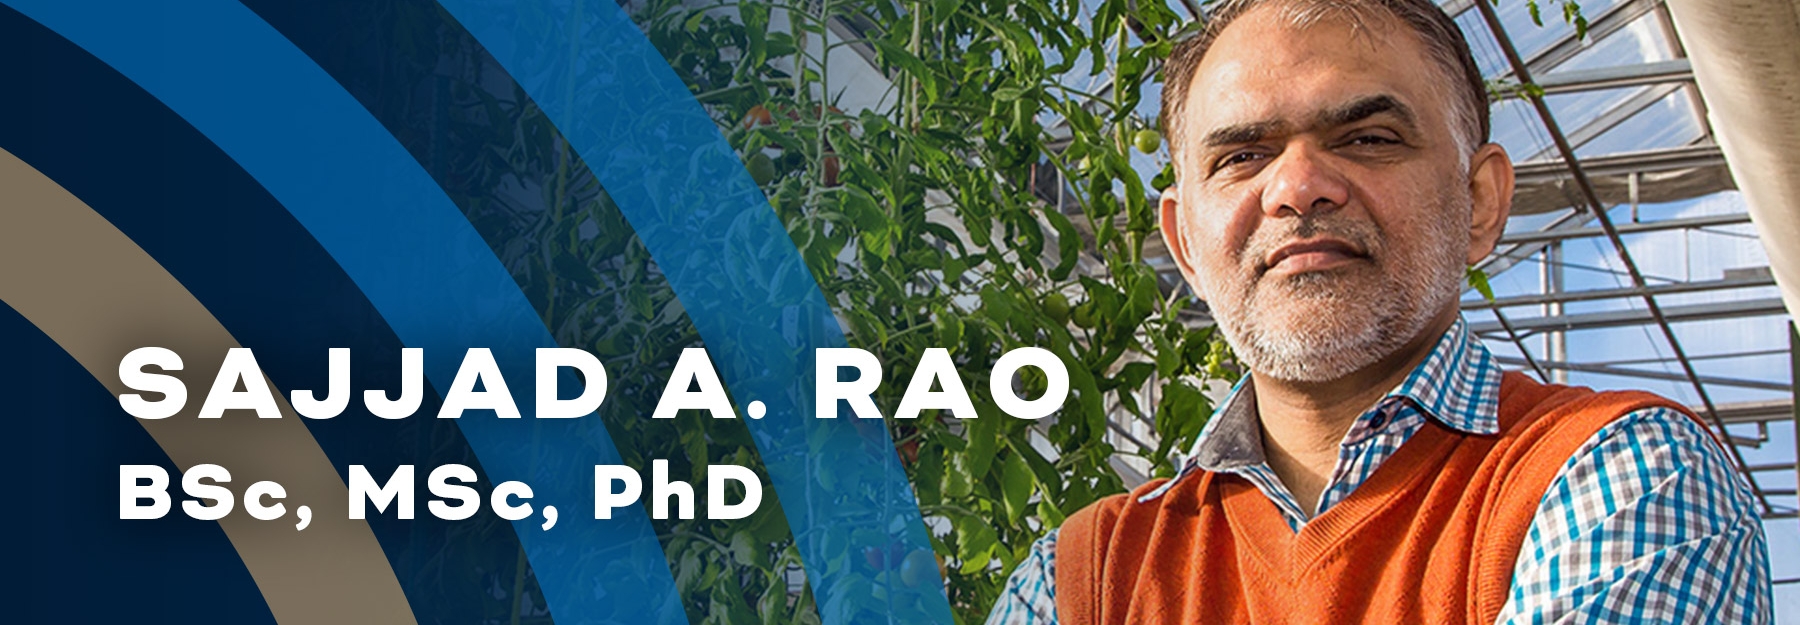 Dr Sajjad Rao standing in front of tomato plants and looking at the camera.